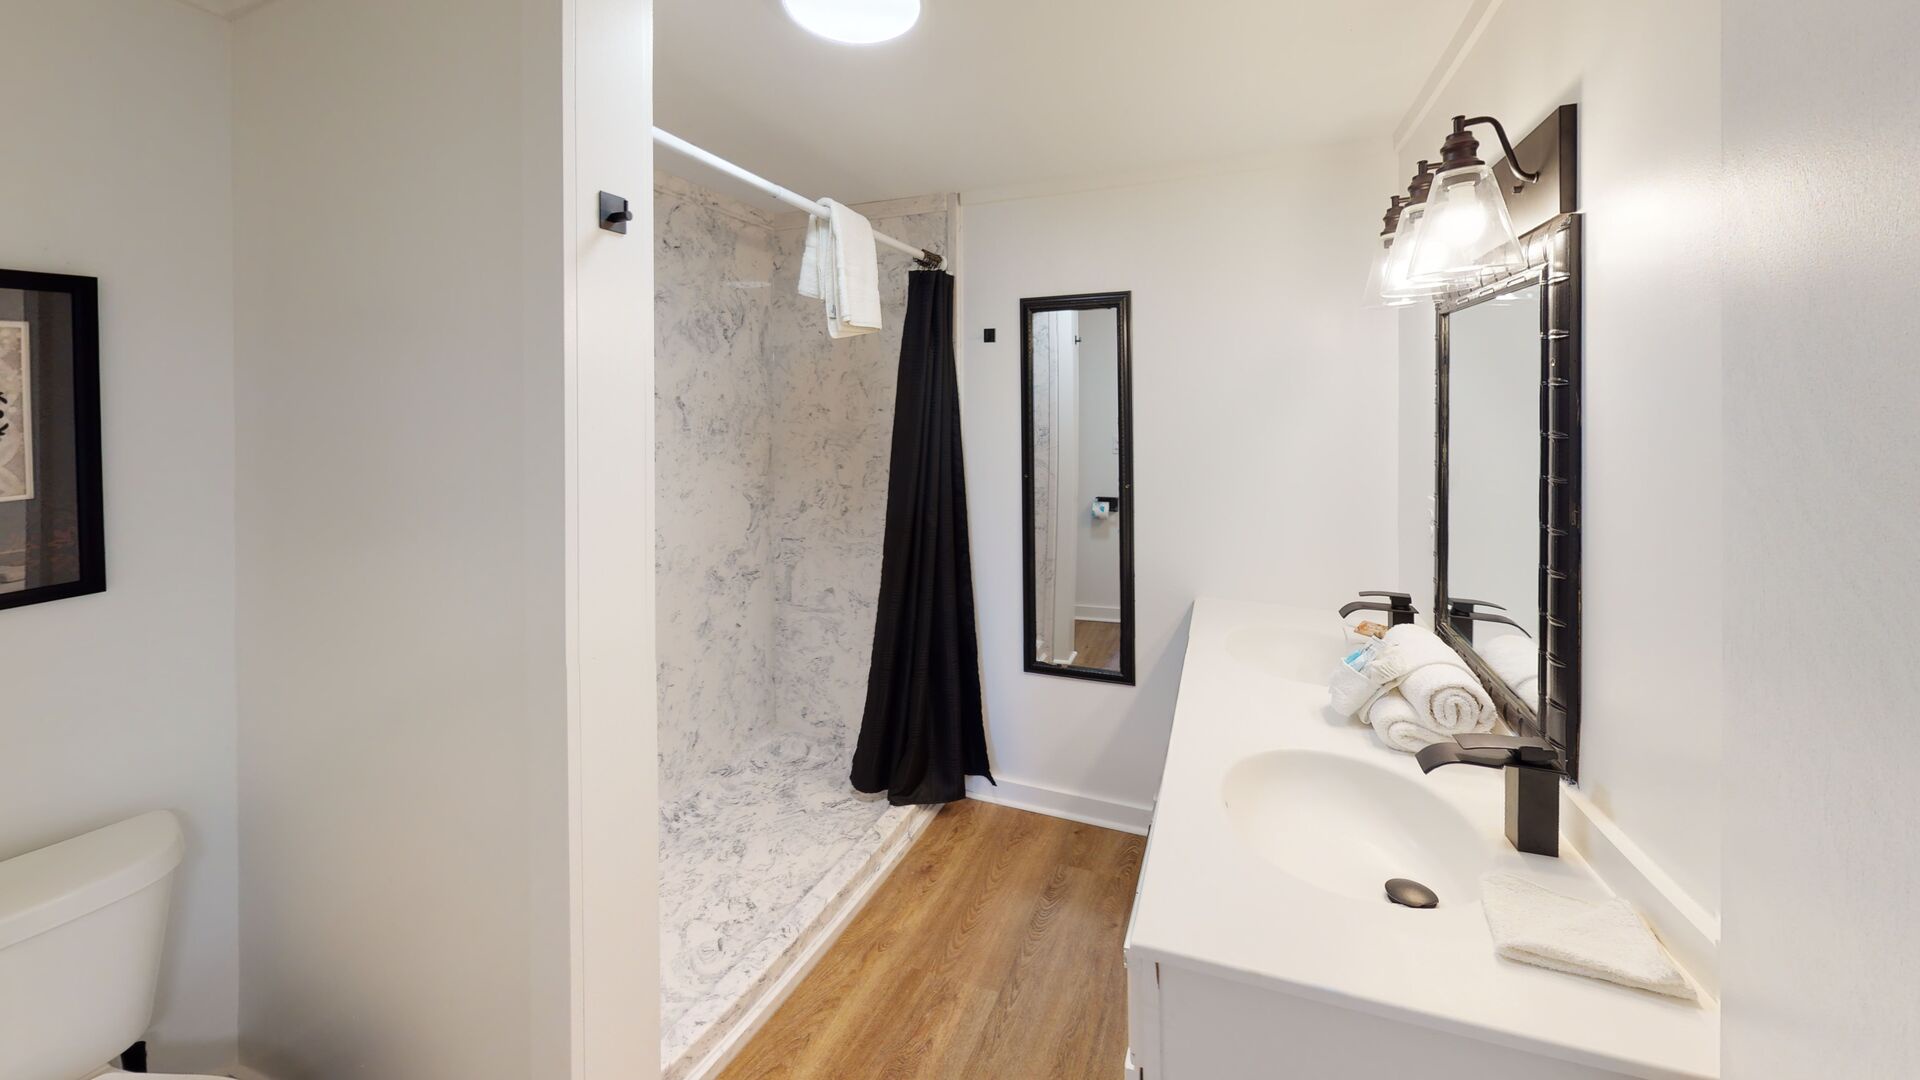 Shared hall bath with walk-in shower and double vanity